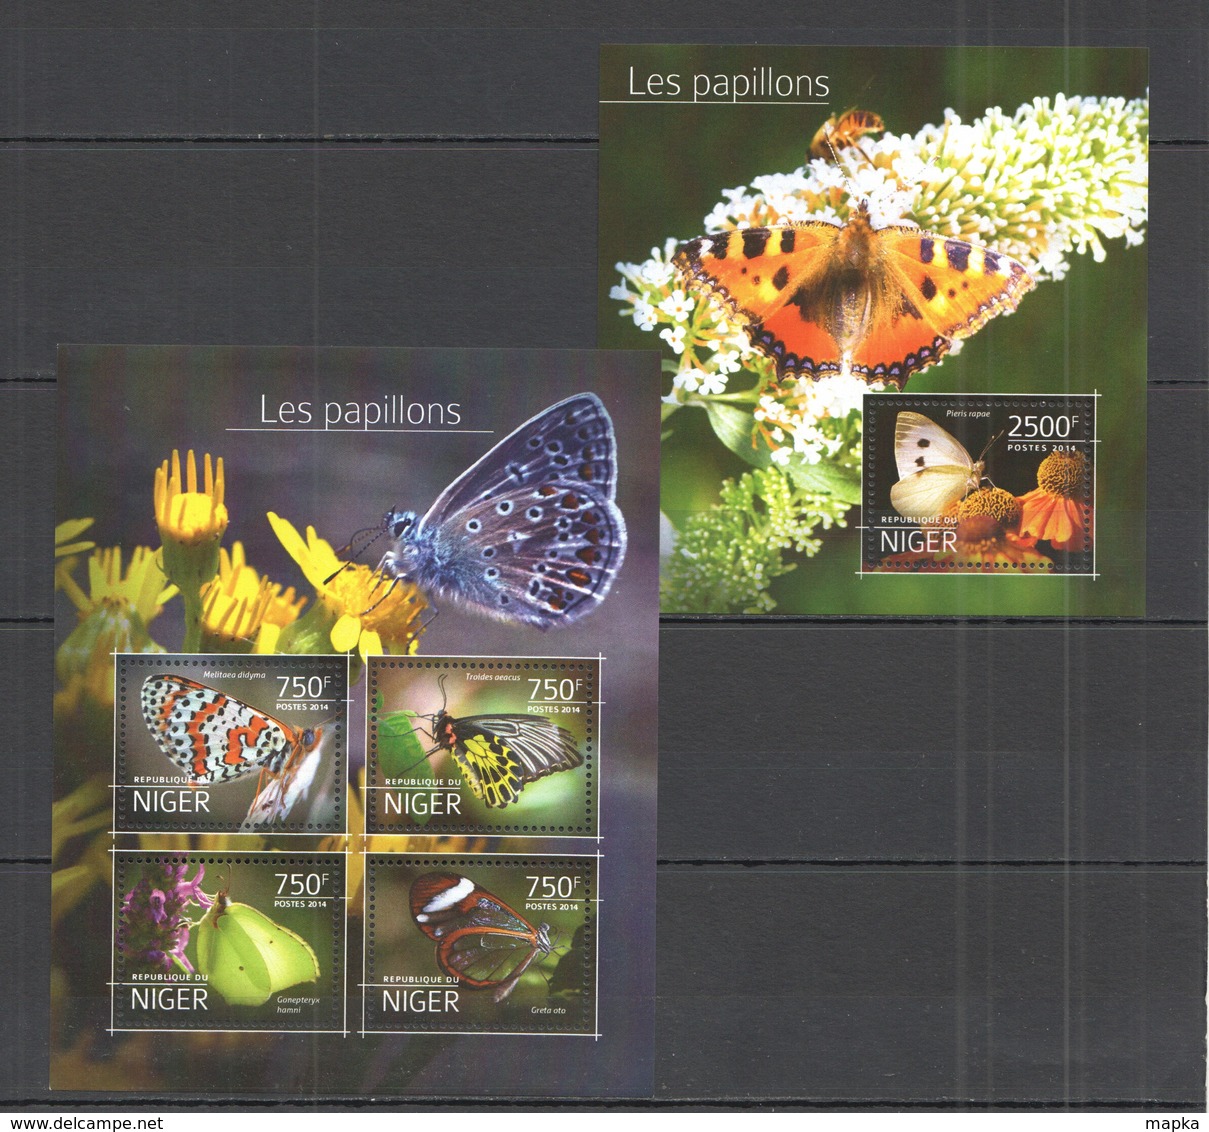 ST2723 2014 NIGER FAUNA INSECTS BUTTERFLIES LES PAPILLONS 1KB+1BL MNH - Farfalle